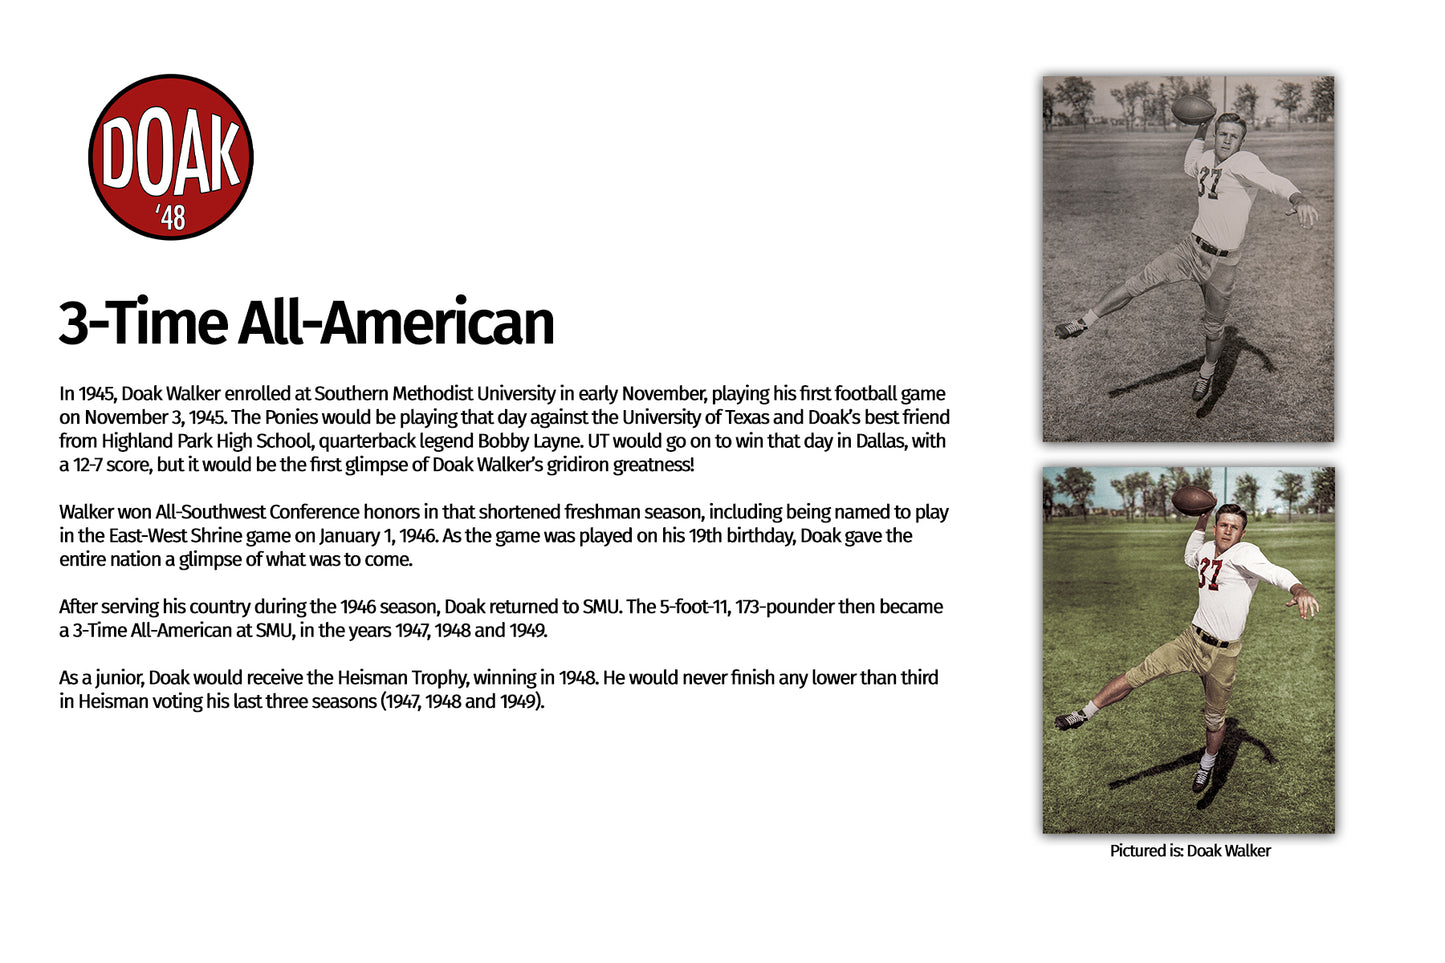 3-Time All-American (Fine Art on Sintra)